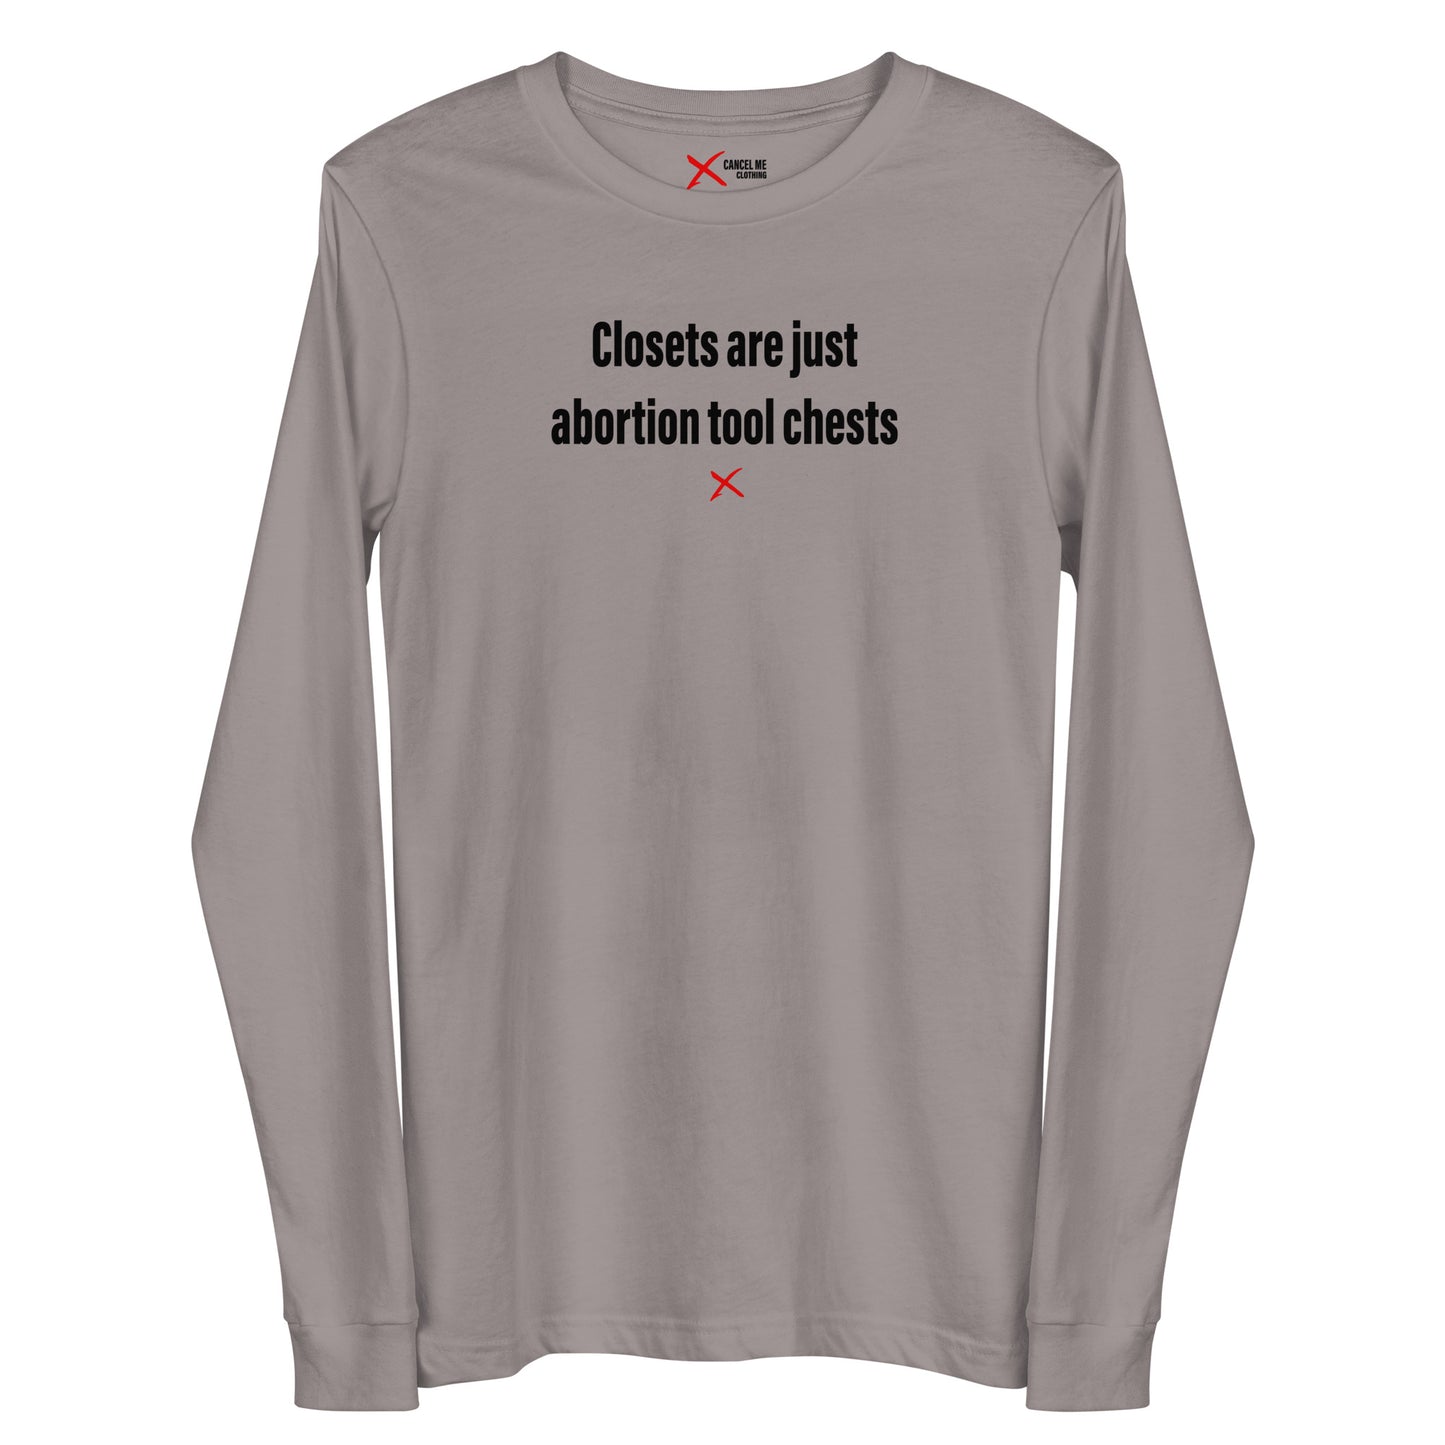 Closets are just abortion tool chests - Longsleeve